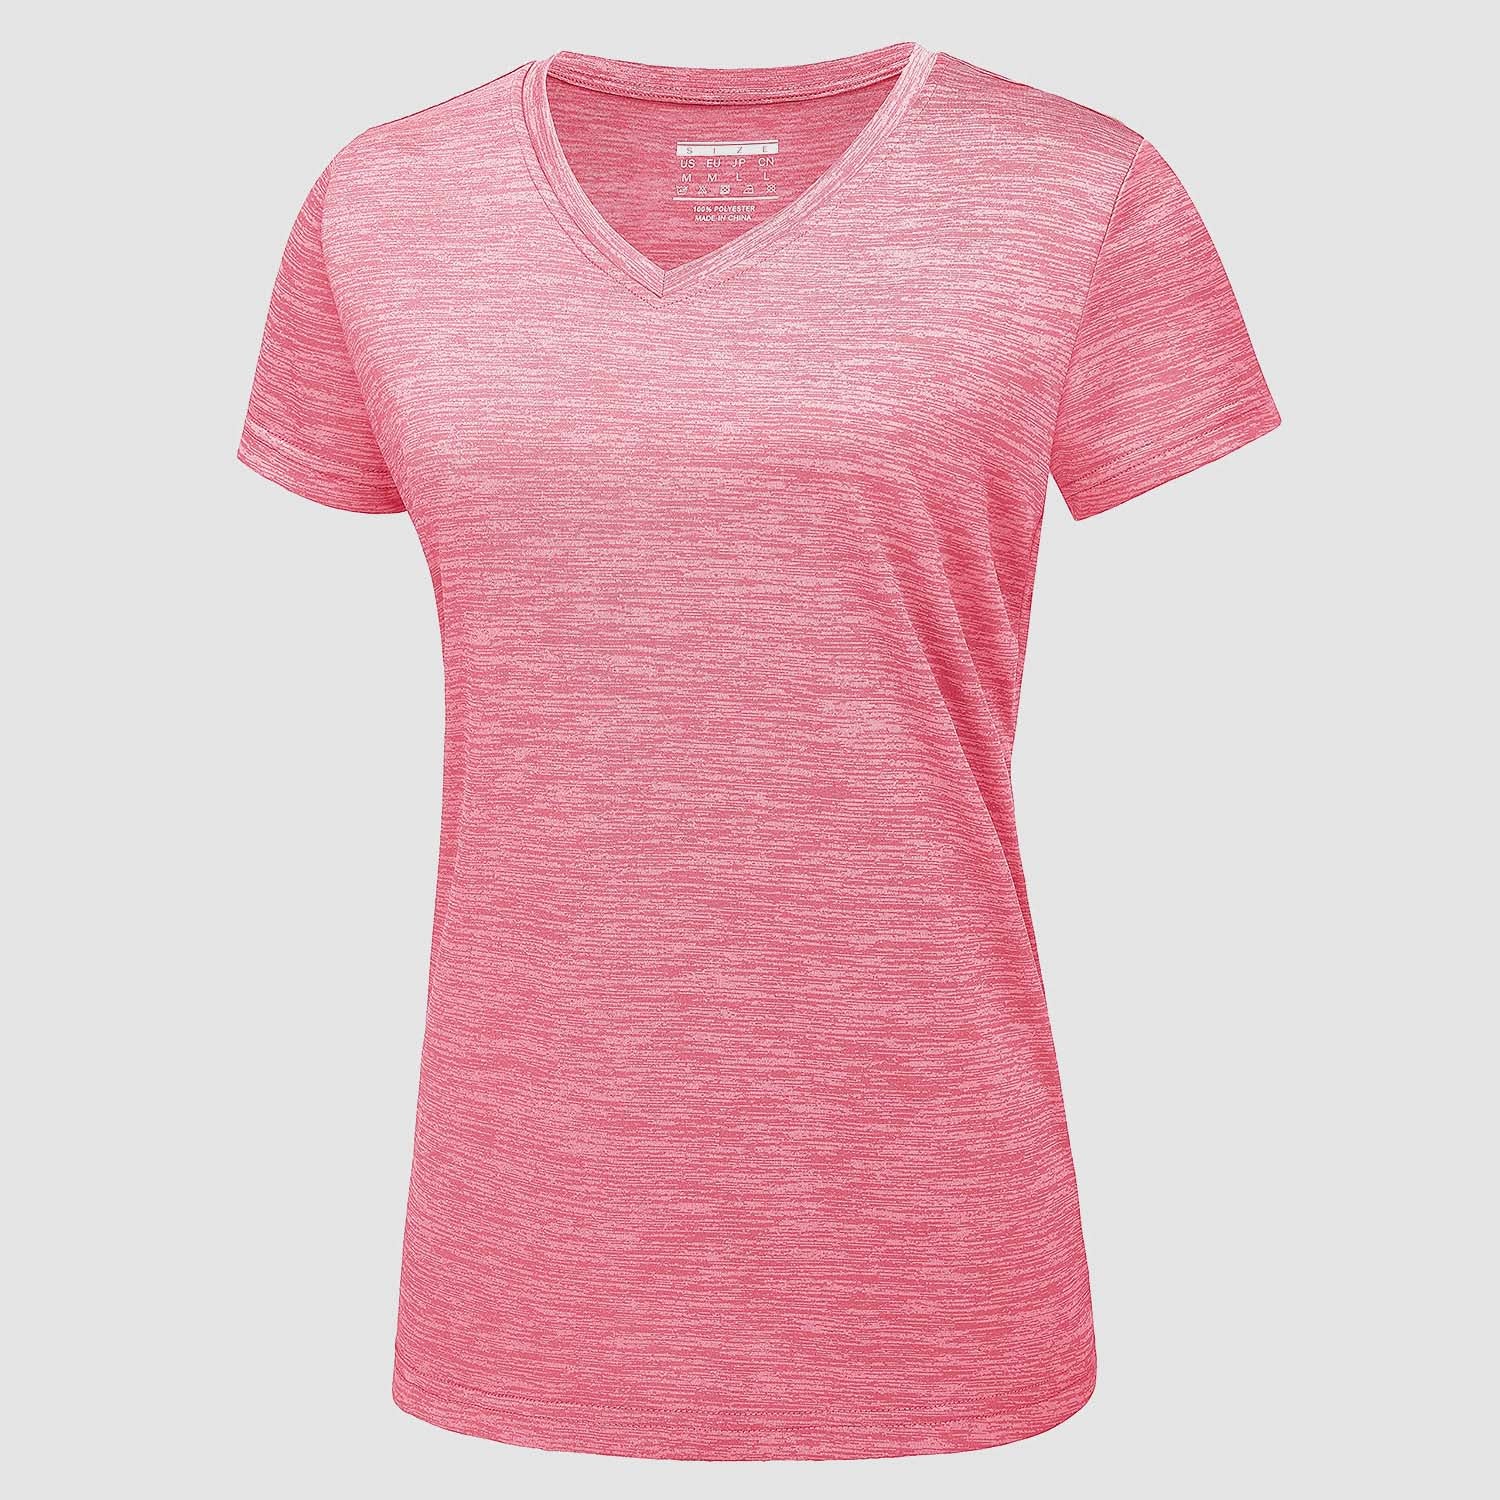 Women's V Neck T-shirt Moisture Wicking Yoga Shirts Quick Dry Athletic Top